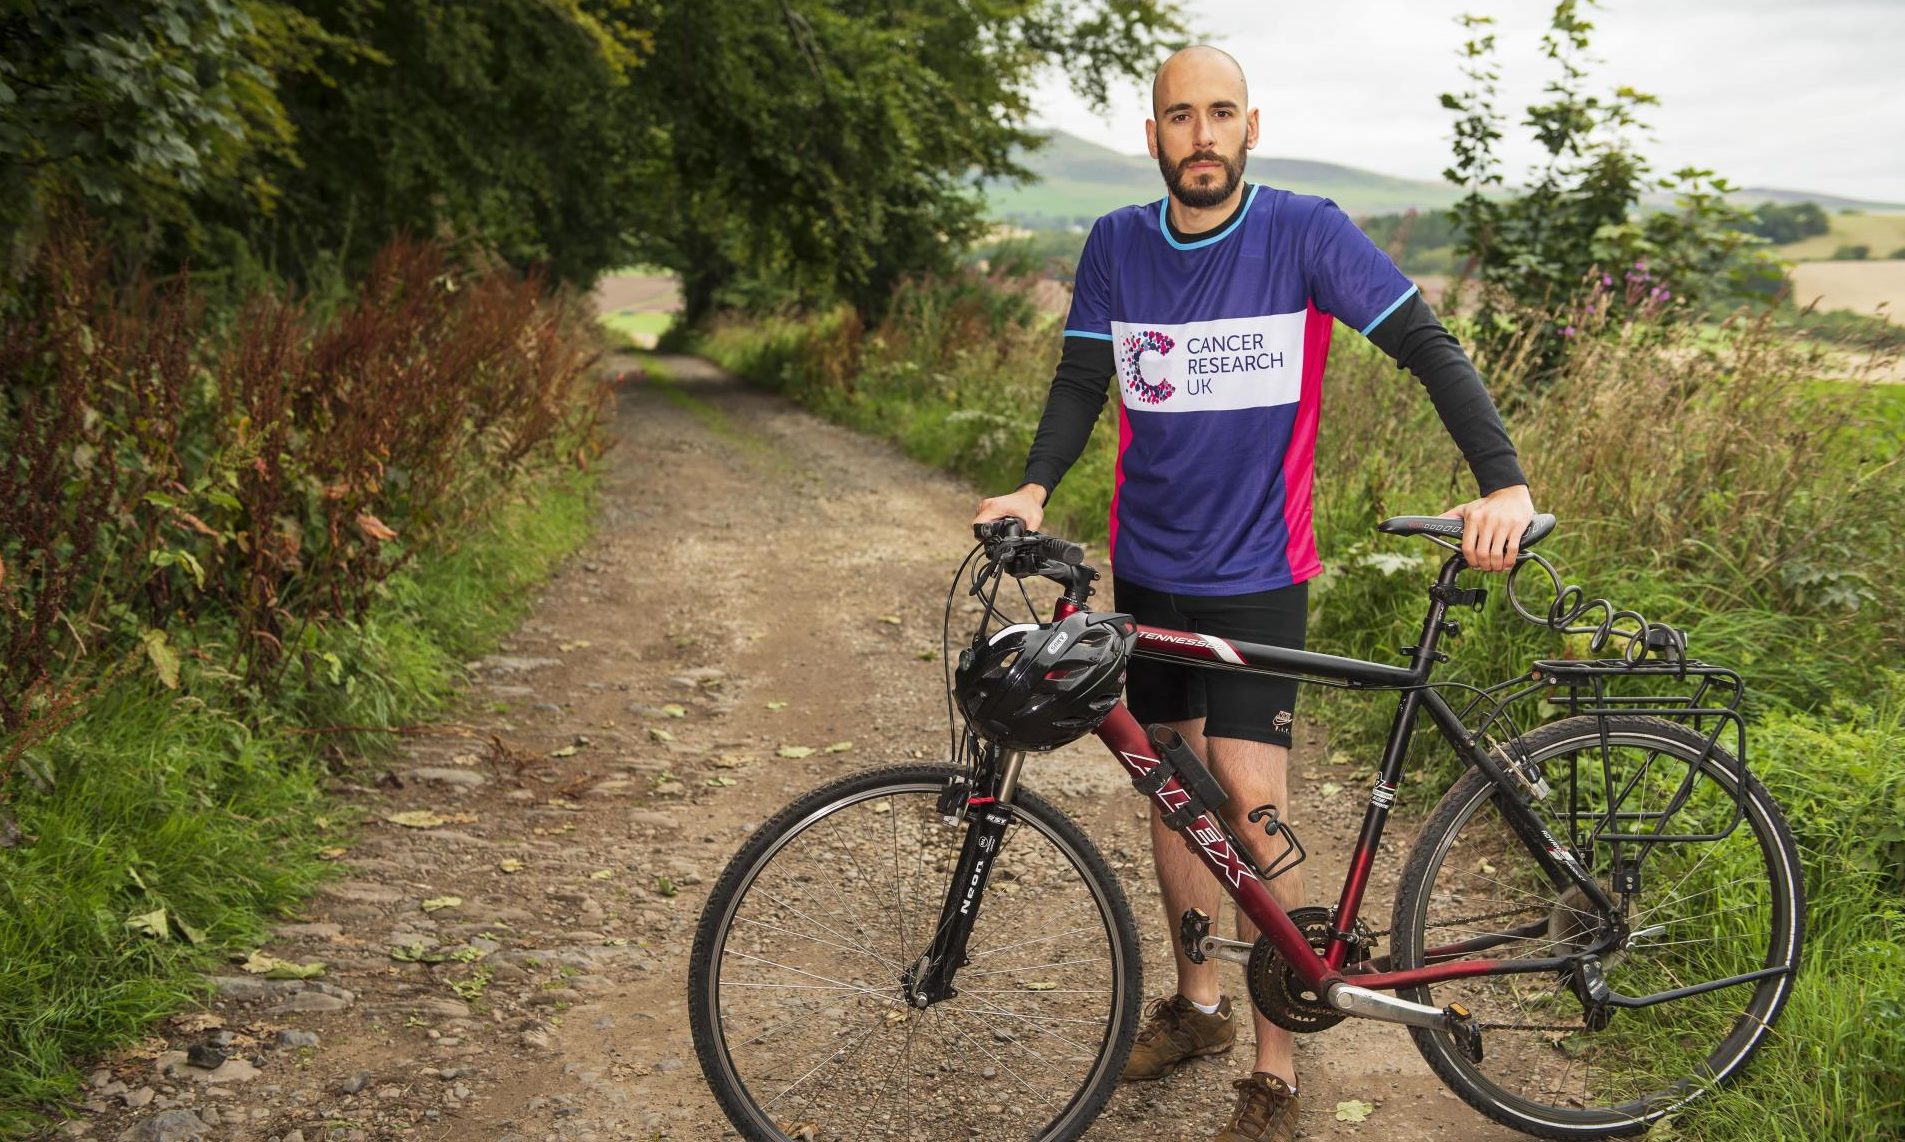 Dr Laureano de la Vega is encouraging people to take part in Cancer Research Uk's Cycle 300 challenge.